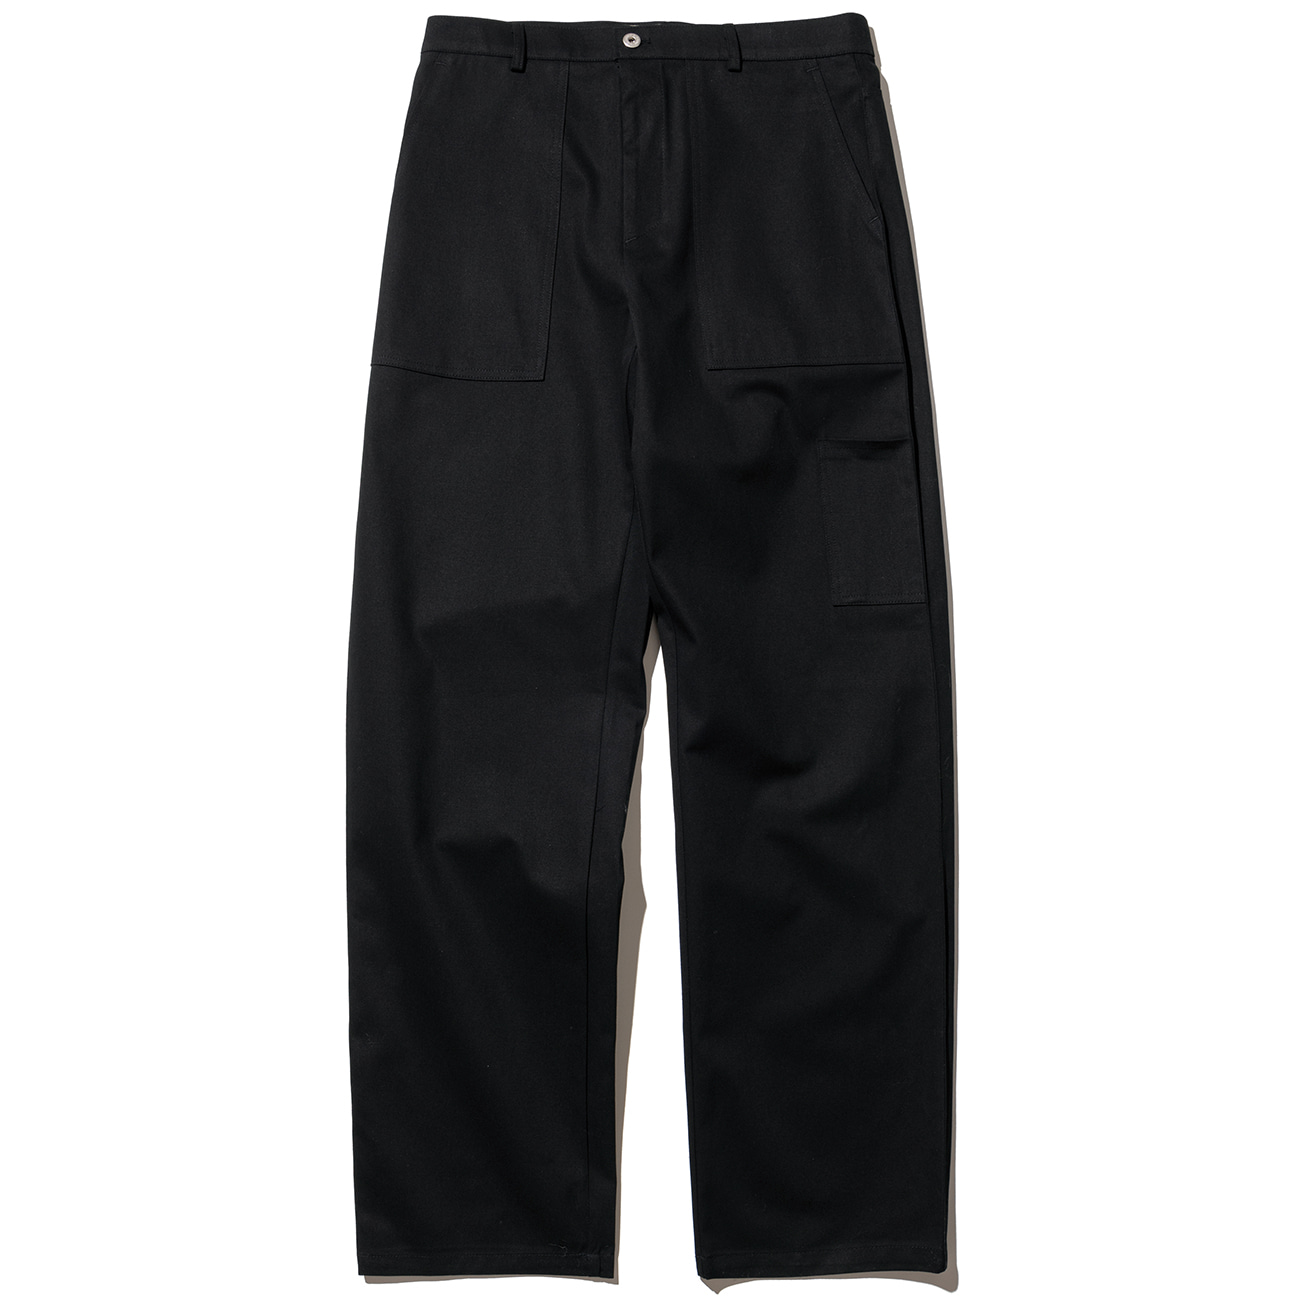 SDDL FATIGUE ROLL-UP COTTON PANTS #3 (8th restock)